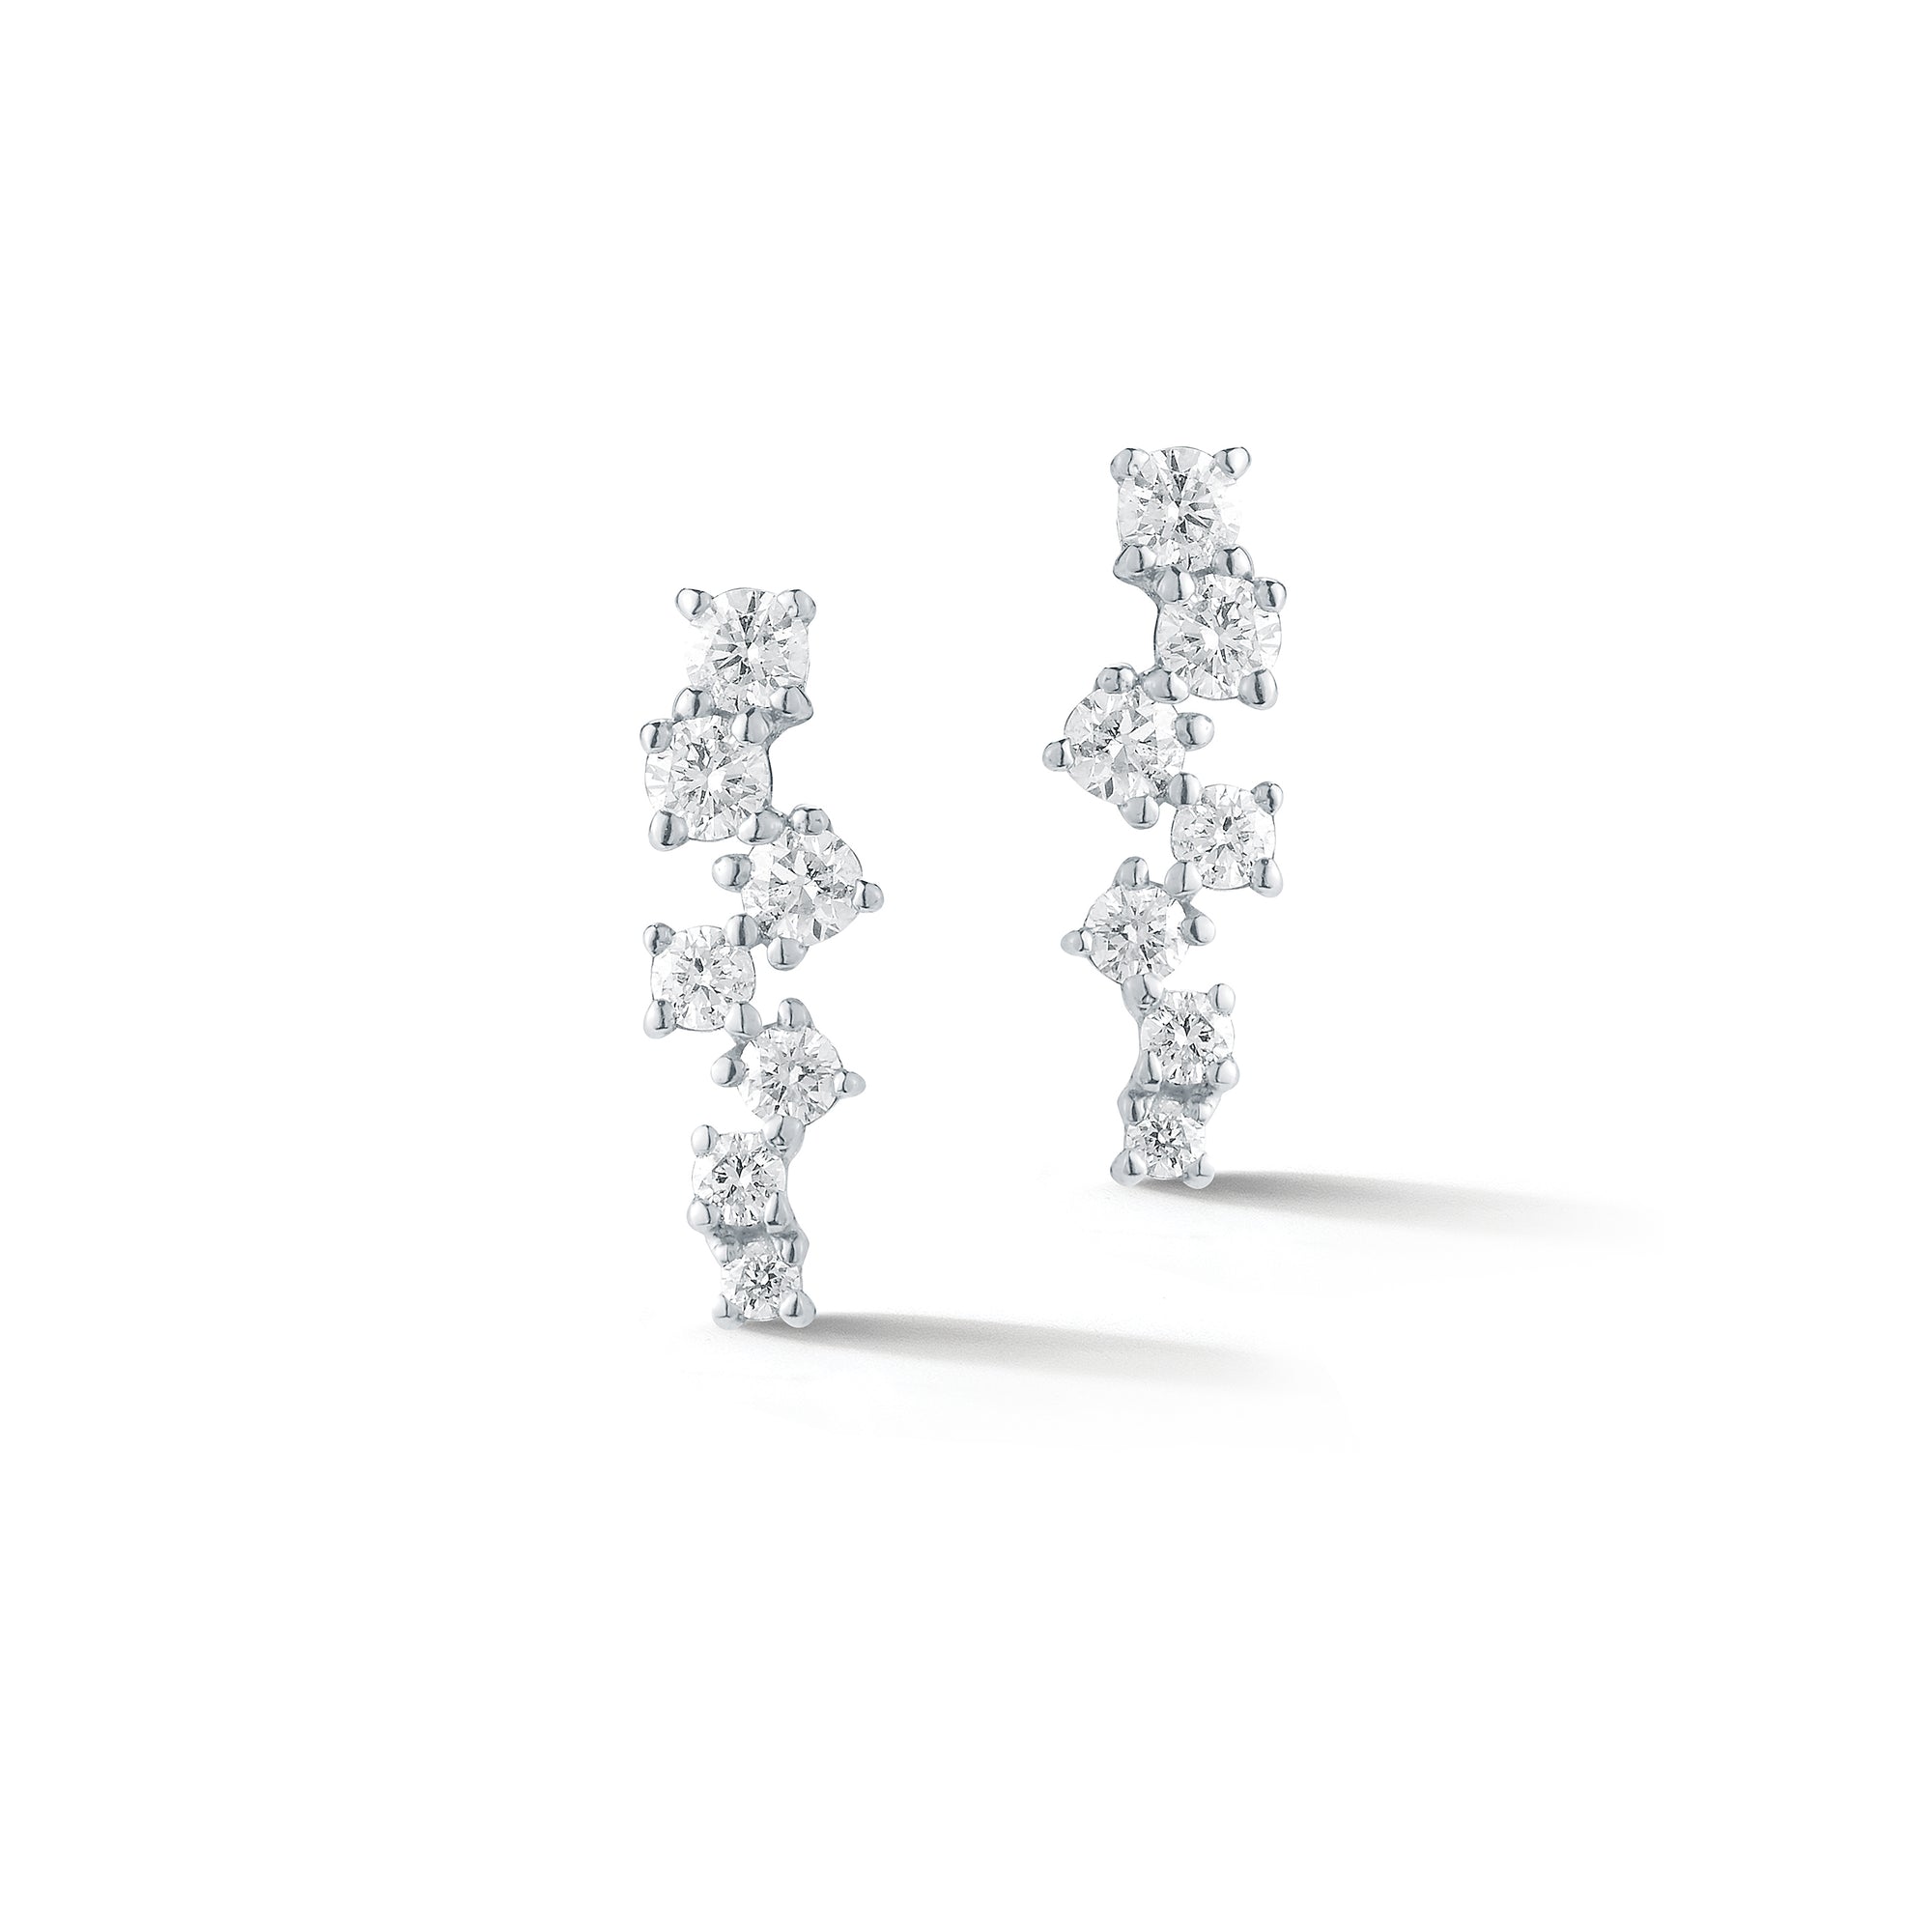 Scattered Diamond Earrings - 14k white gold weighing 1.64 grams - 14 round prong-set diamonds weighing 0.33 carats